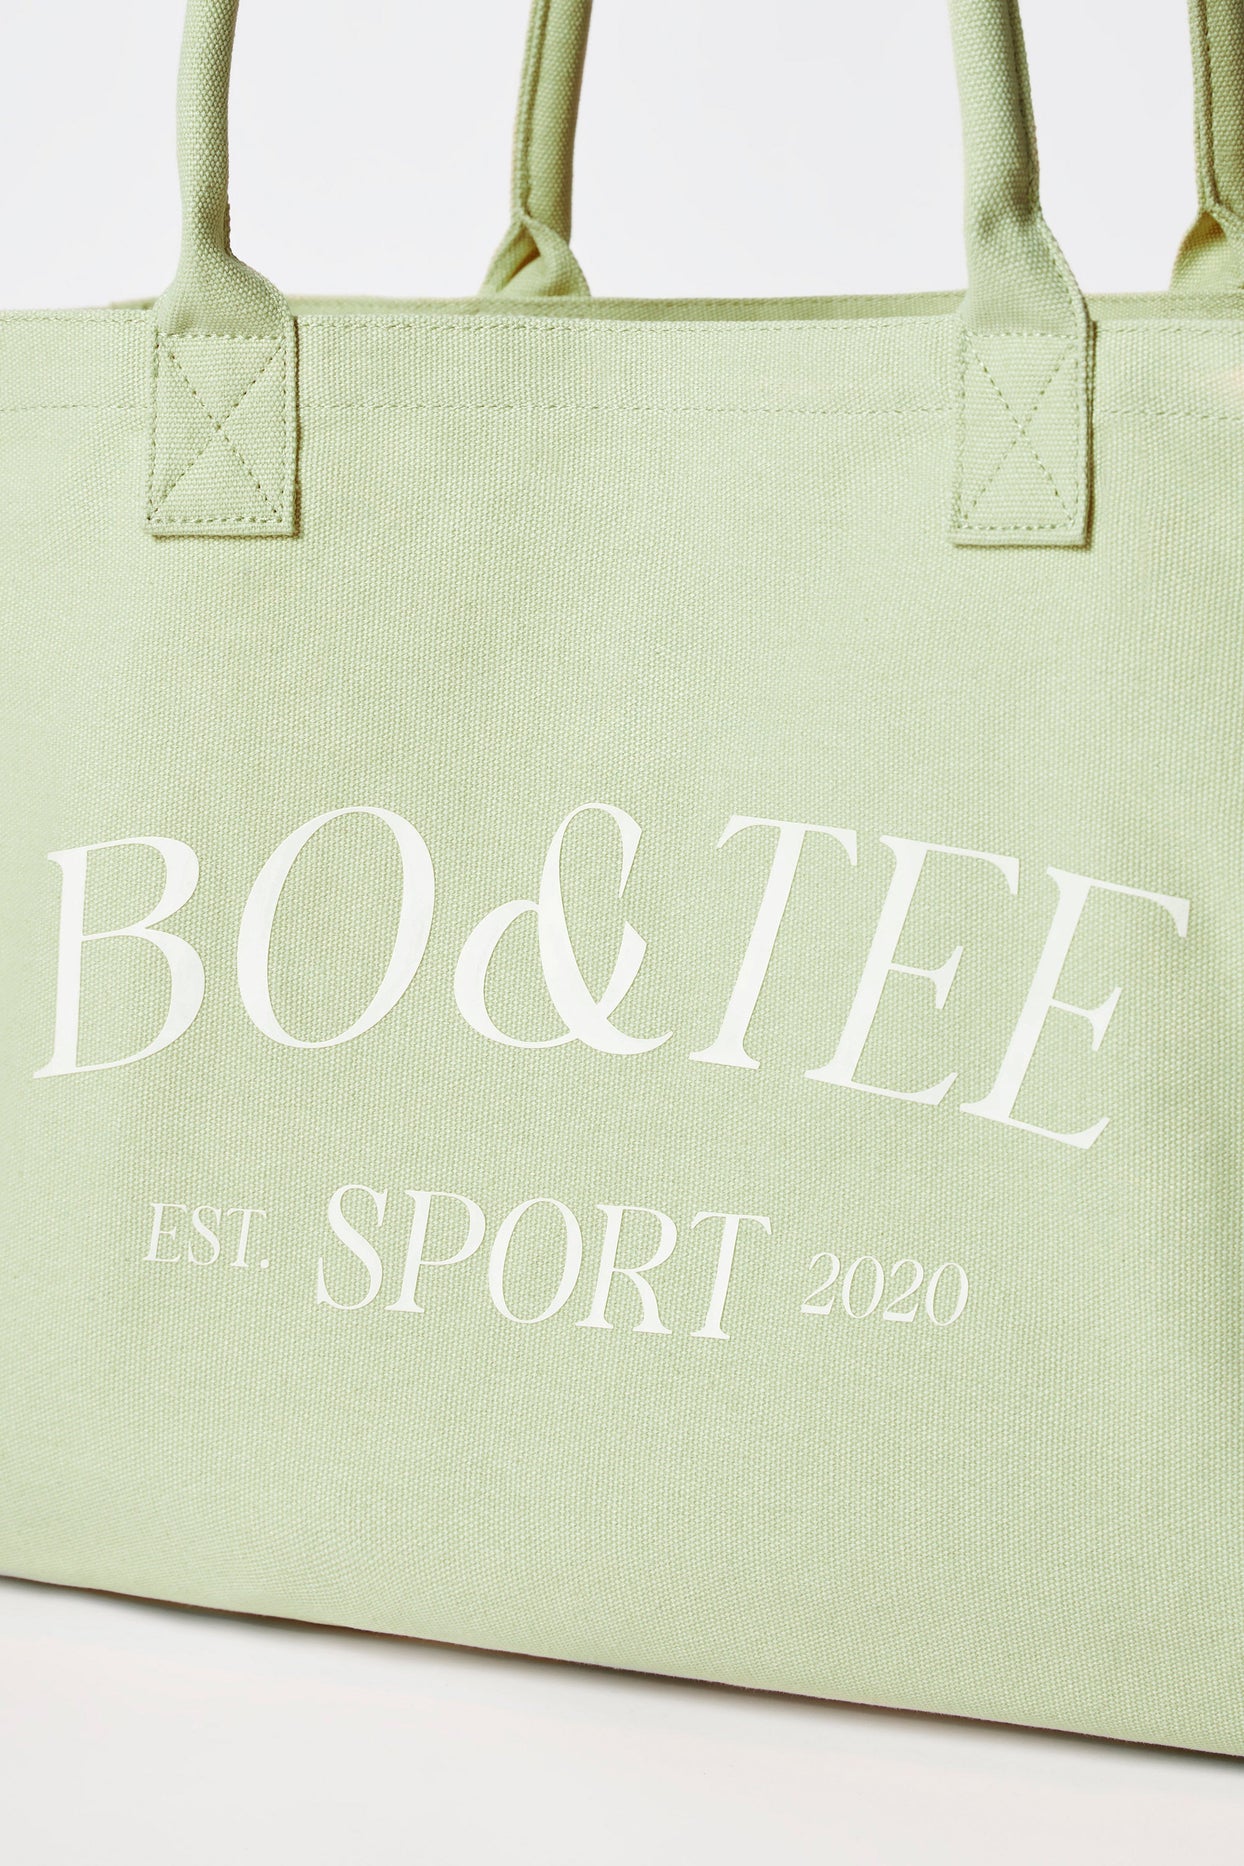 Large Canvas Tote Bag in Lime Green